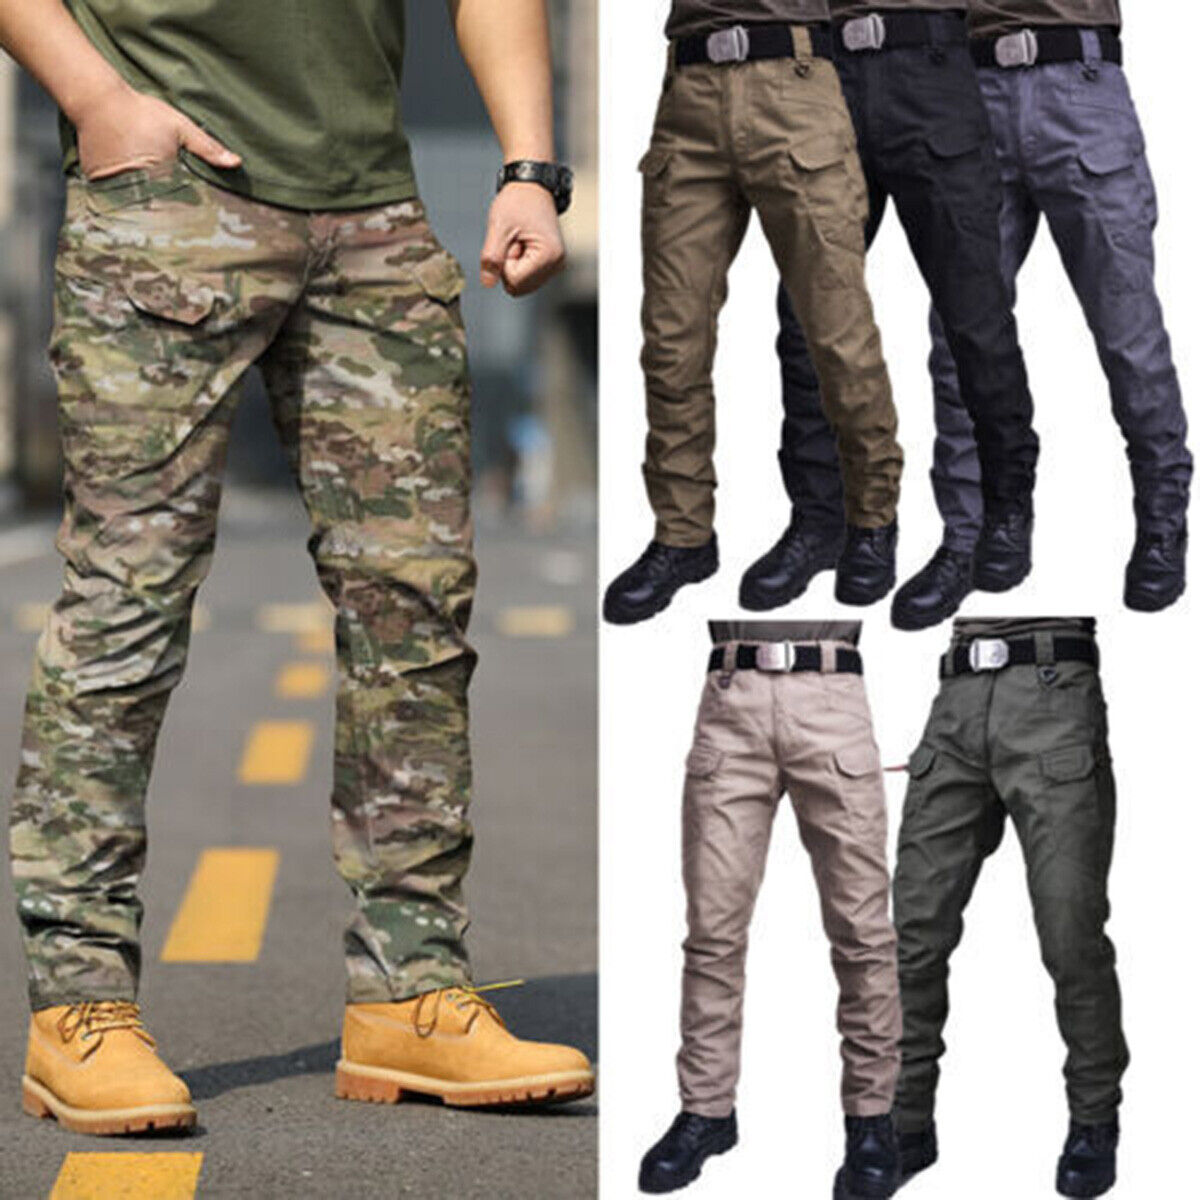 Tactical Combat Multi-pocket Pants Outdoor Hiking Trousers